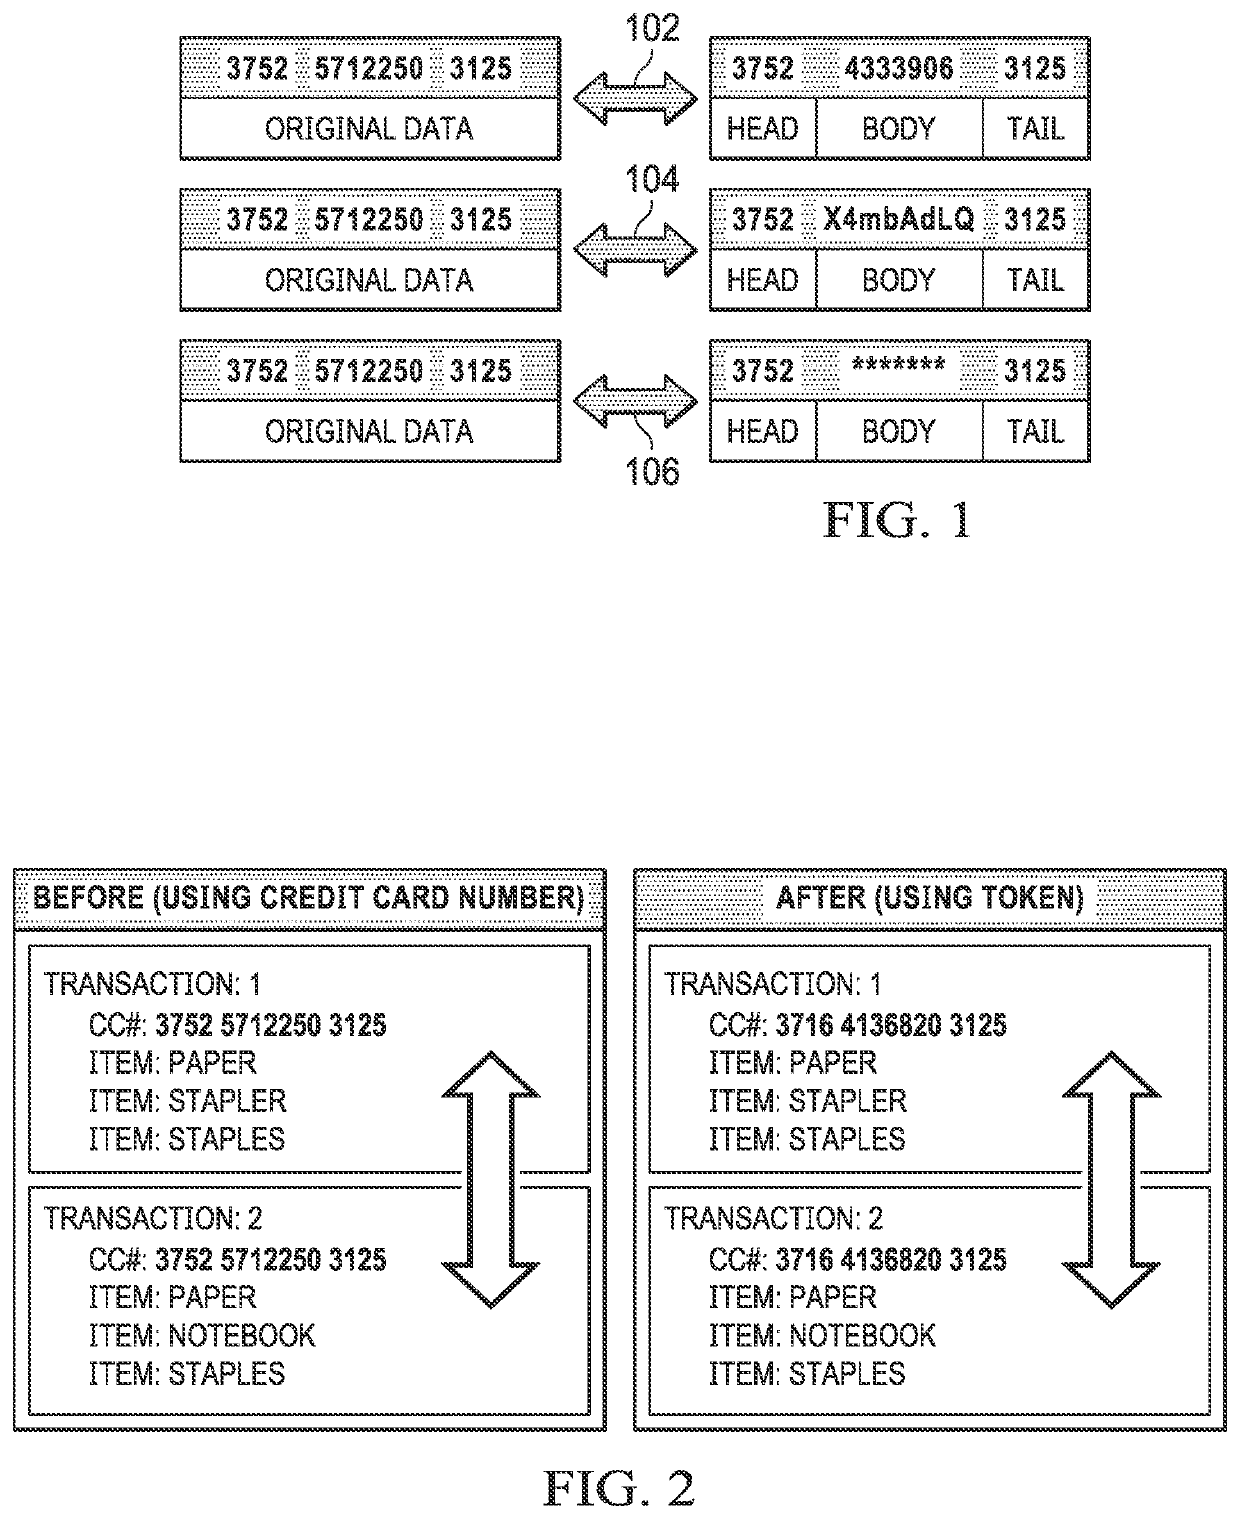 Token-based data security systems and methods for structured data